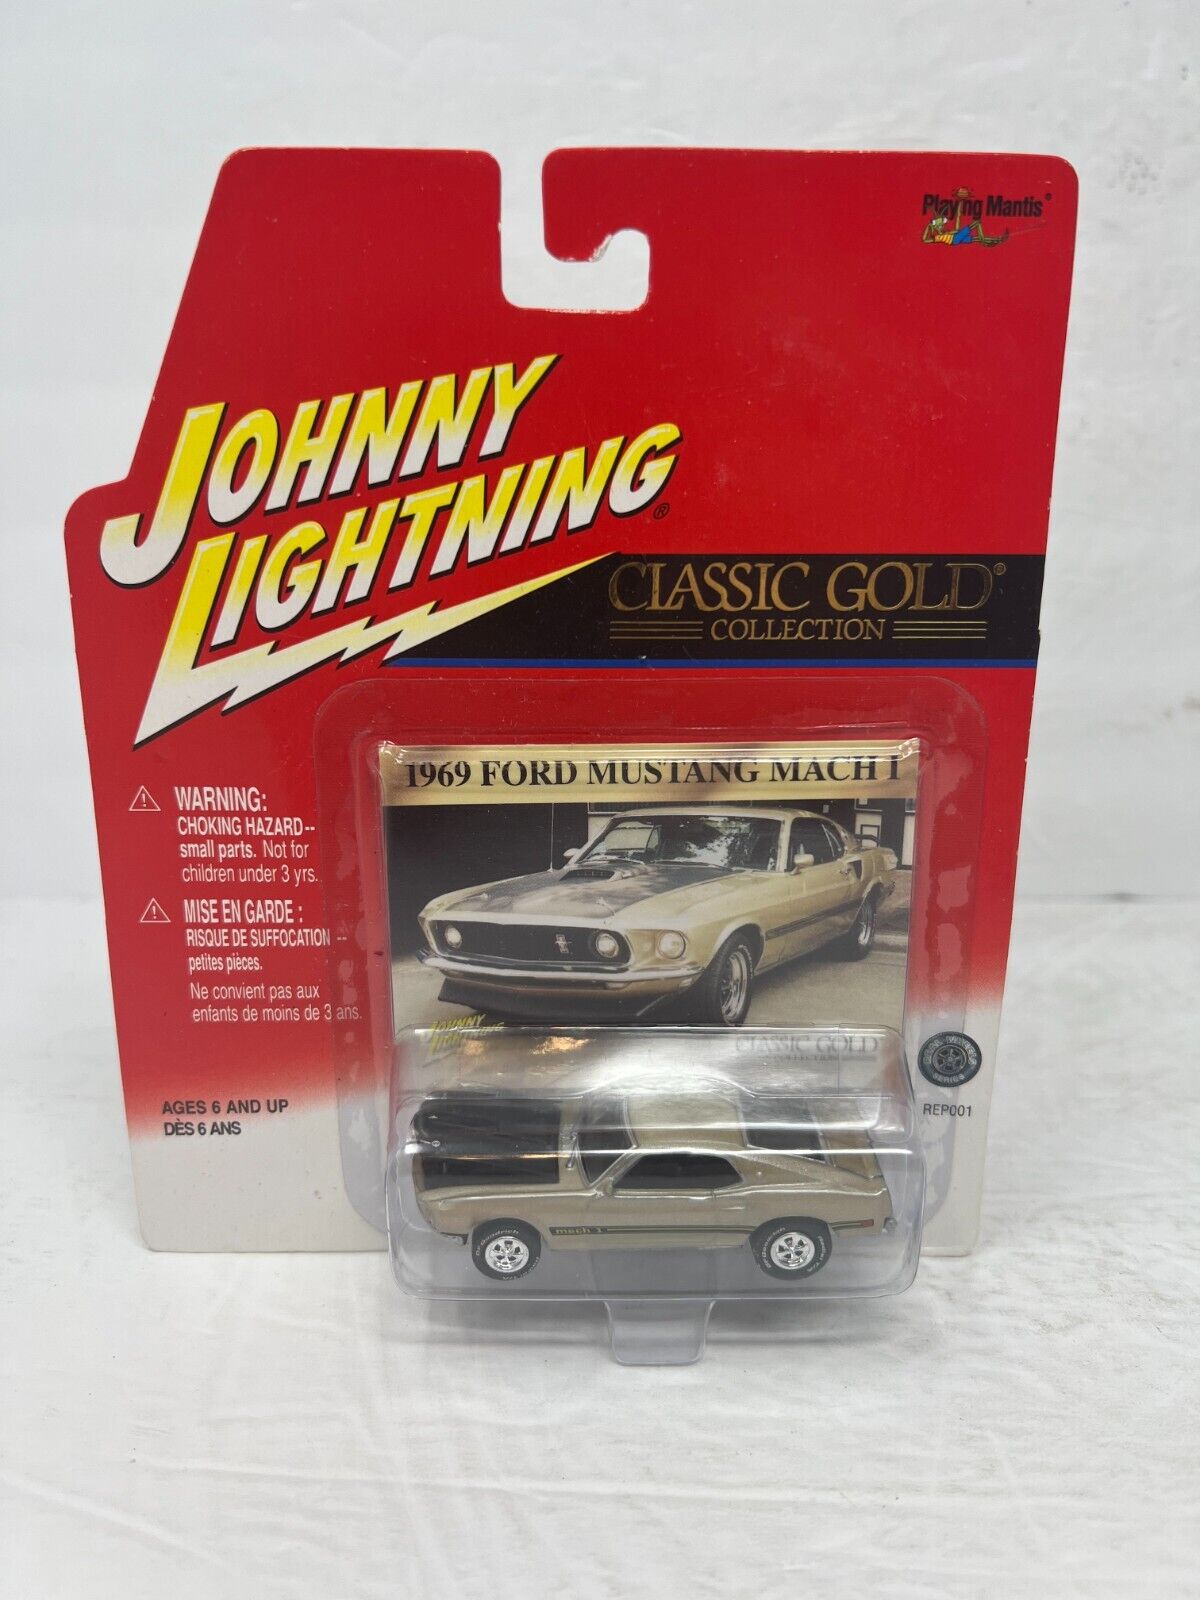 Johnny Lightning Classic Gold Collection 1969 Ford Mustang Mach 1 1:64 Diecast